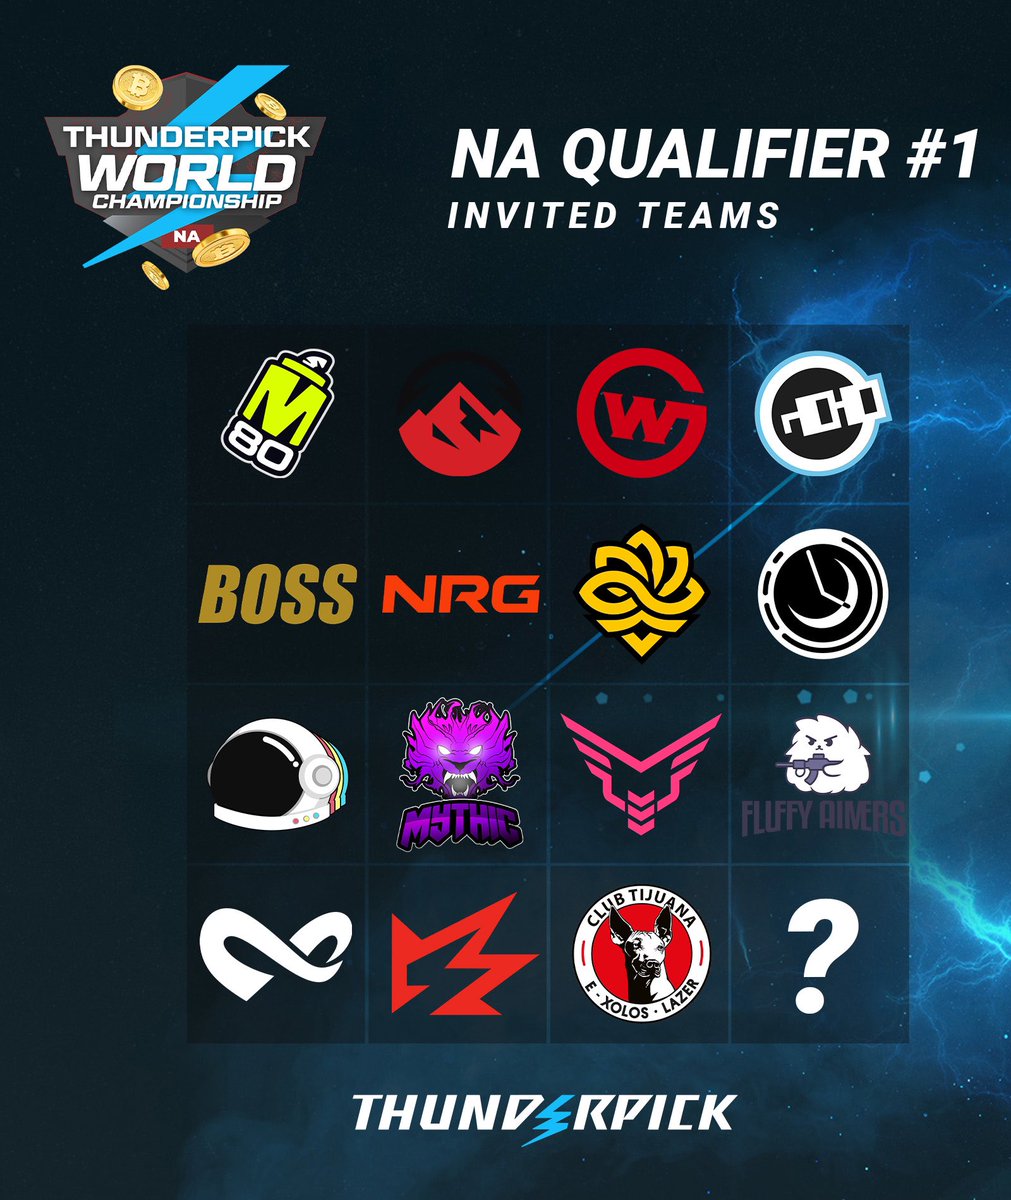 Thunderpick have announced their 16 invited NA teams trying to qualify for their $1 million CS Championship this October 👀 #ad